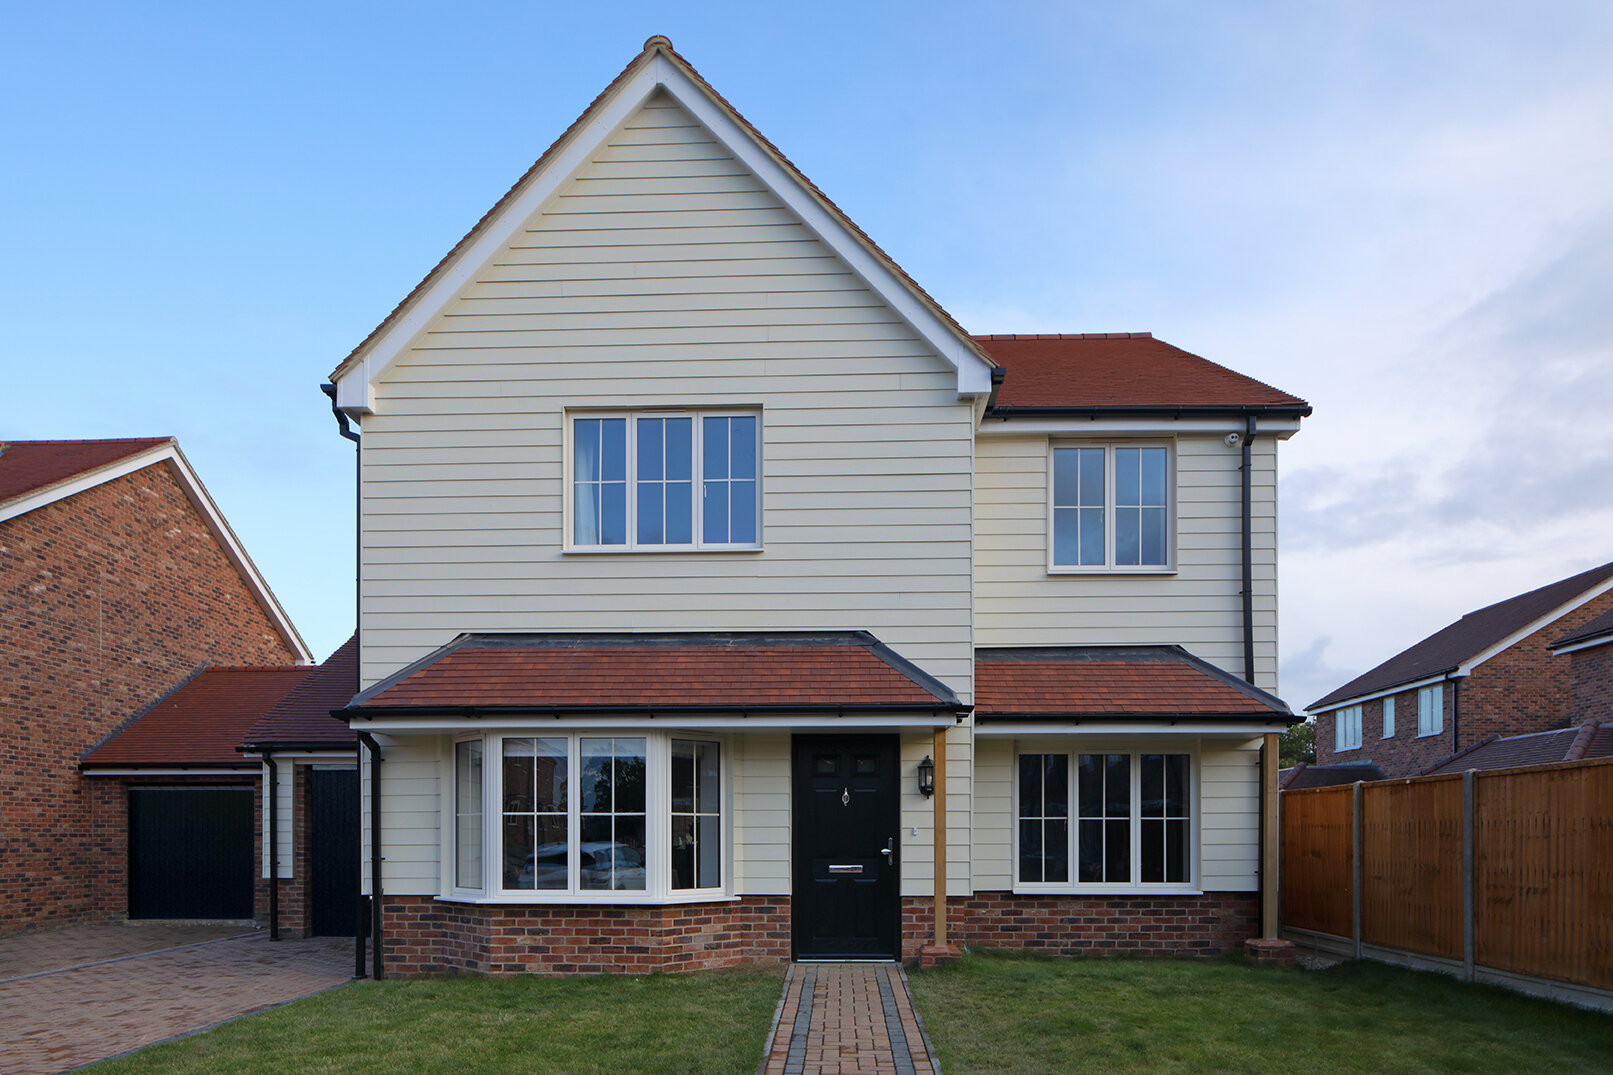   The Show Home at The Ridings development looks so lovely - you have done a great job! The purchasers who came to the Open Day thought it was marvellous.      Eve Reed, Zoe Napier Group  